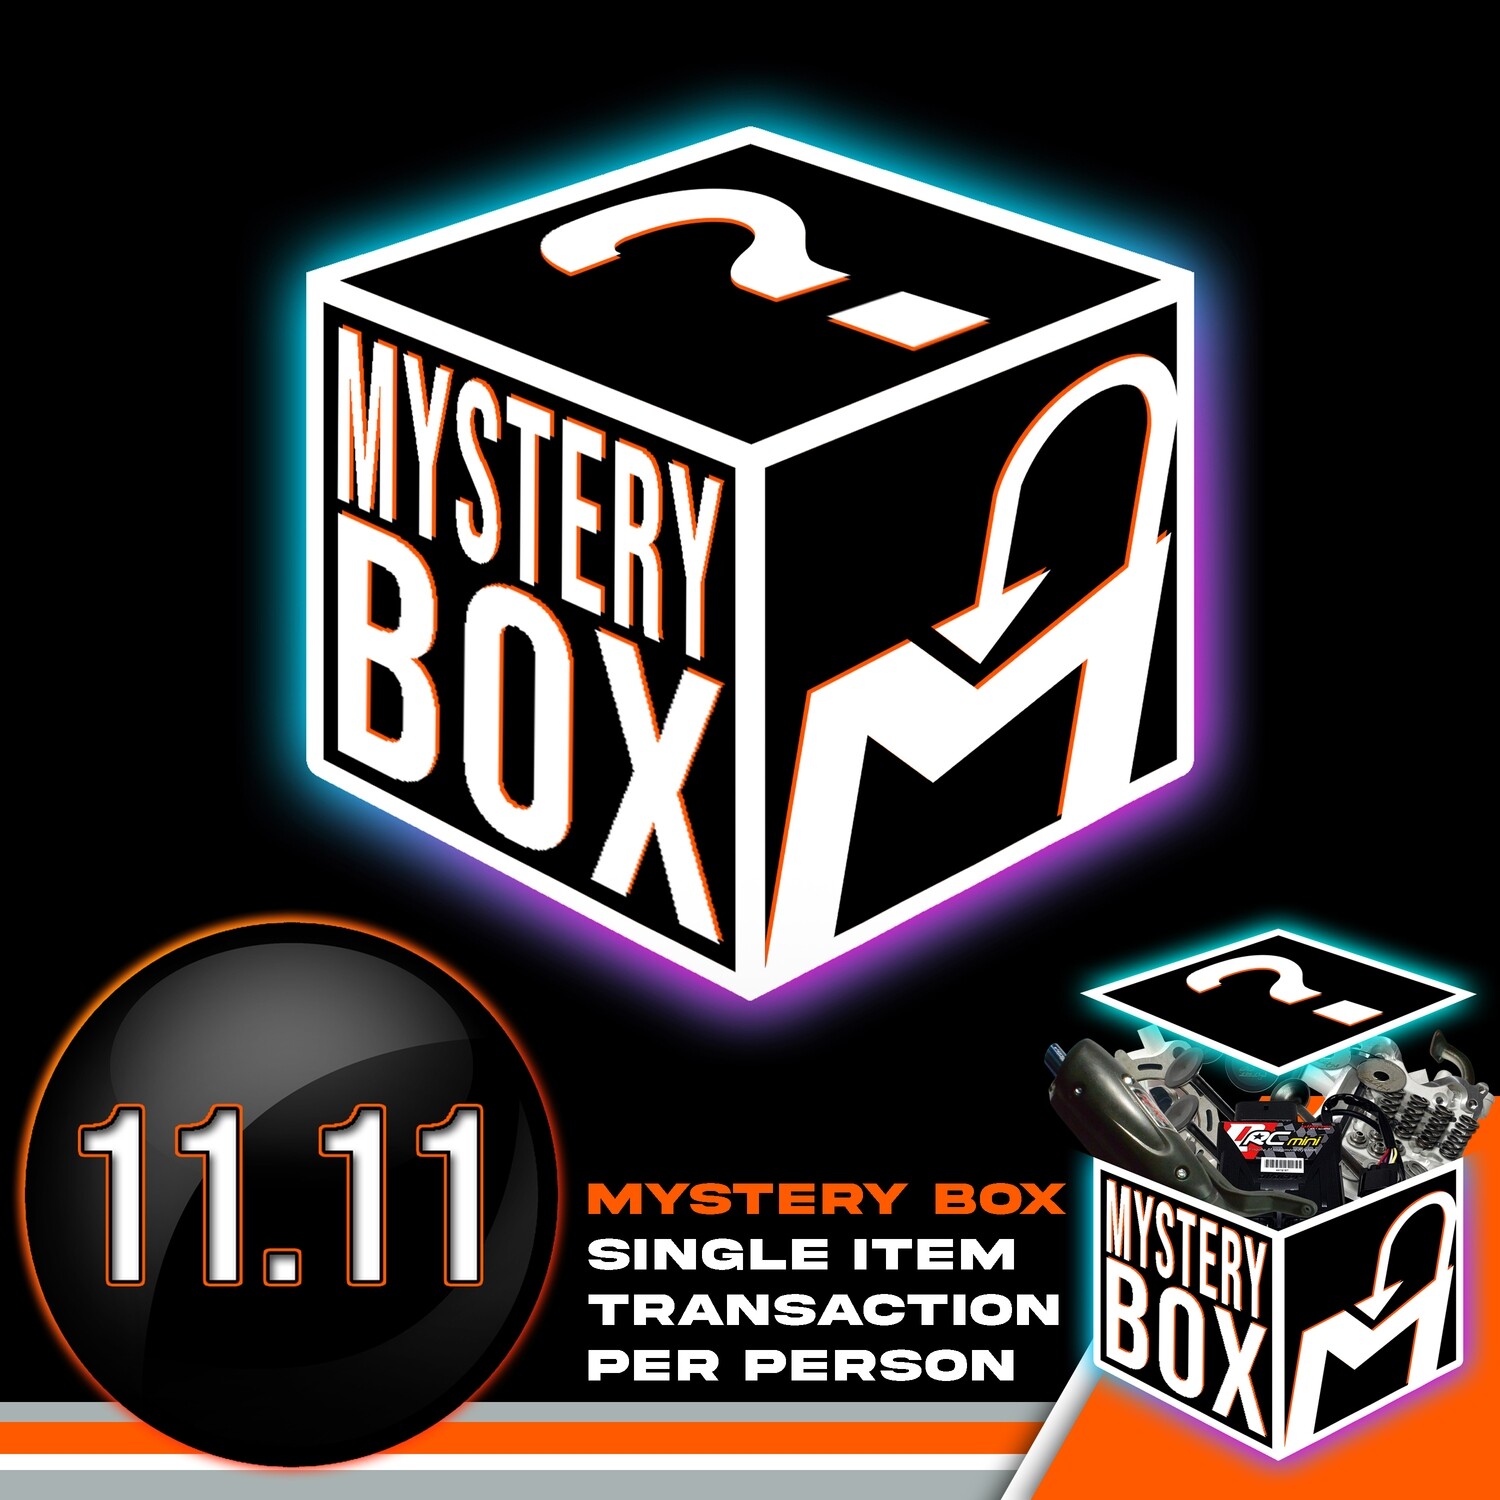 MYSTERY BOX #155 ( 11.11 PROMO EXTENDED )